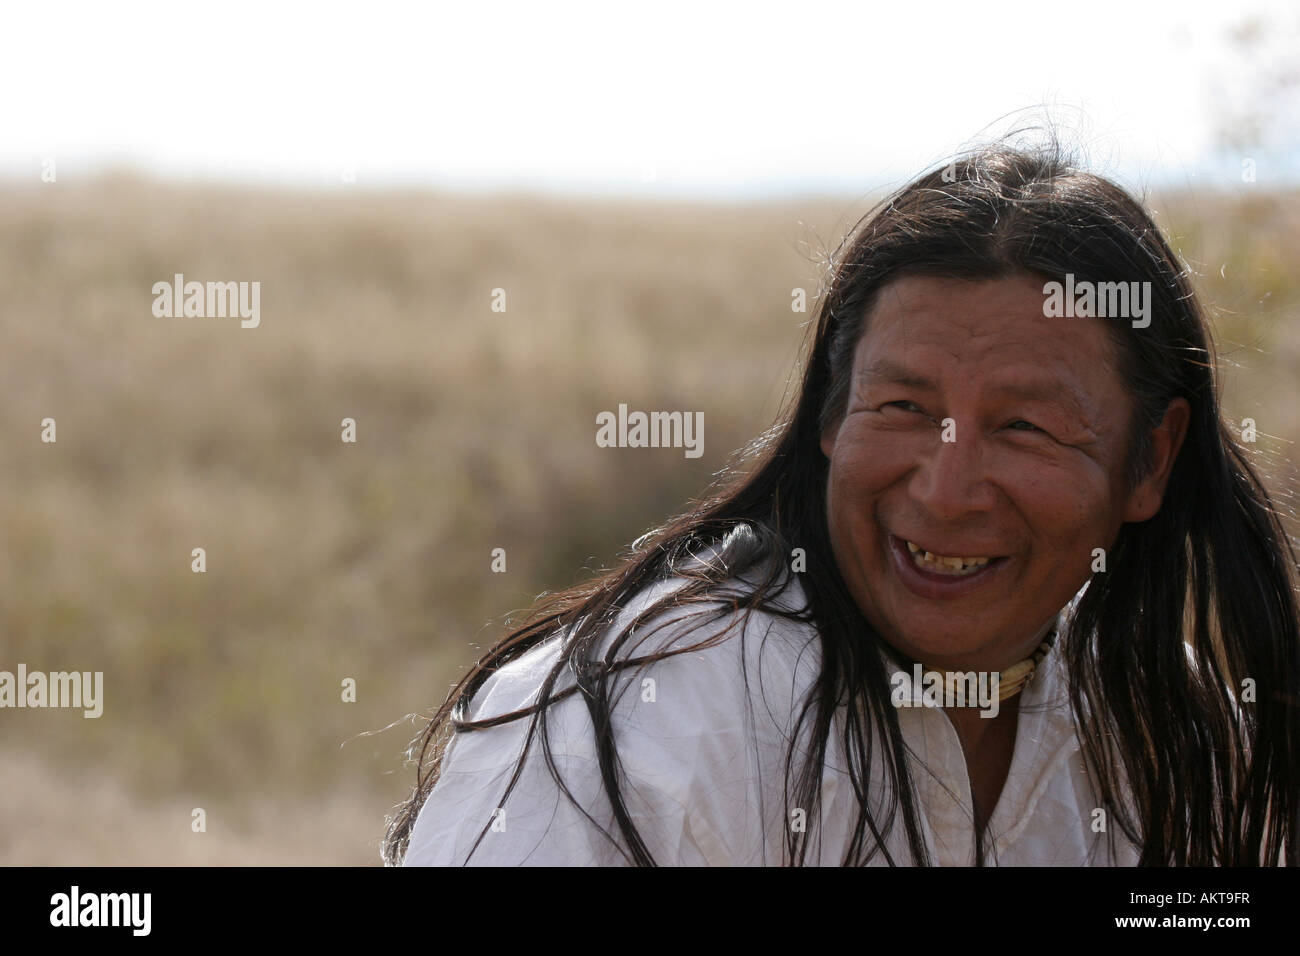 a-native-american-indian-male-portrait-smiling-and-laughing-AKT9FR.jpg